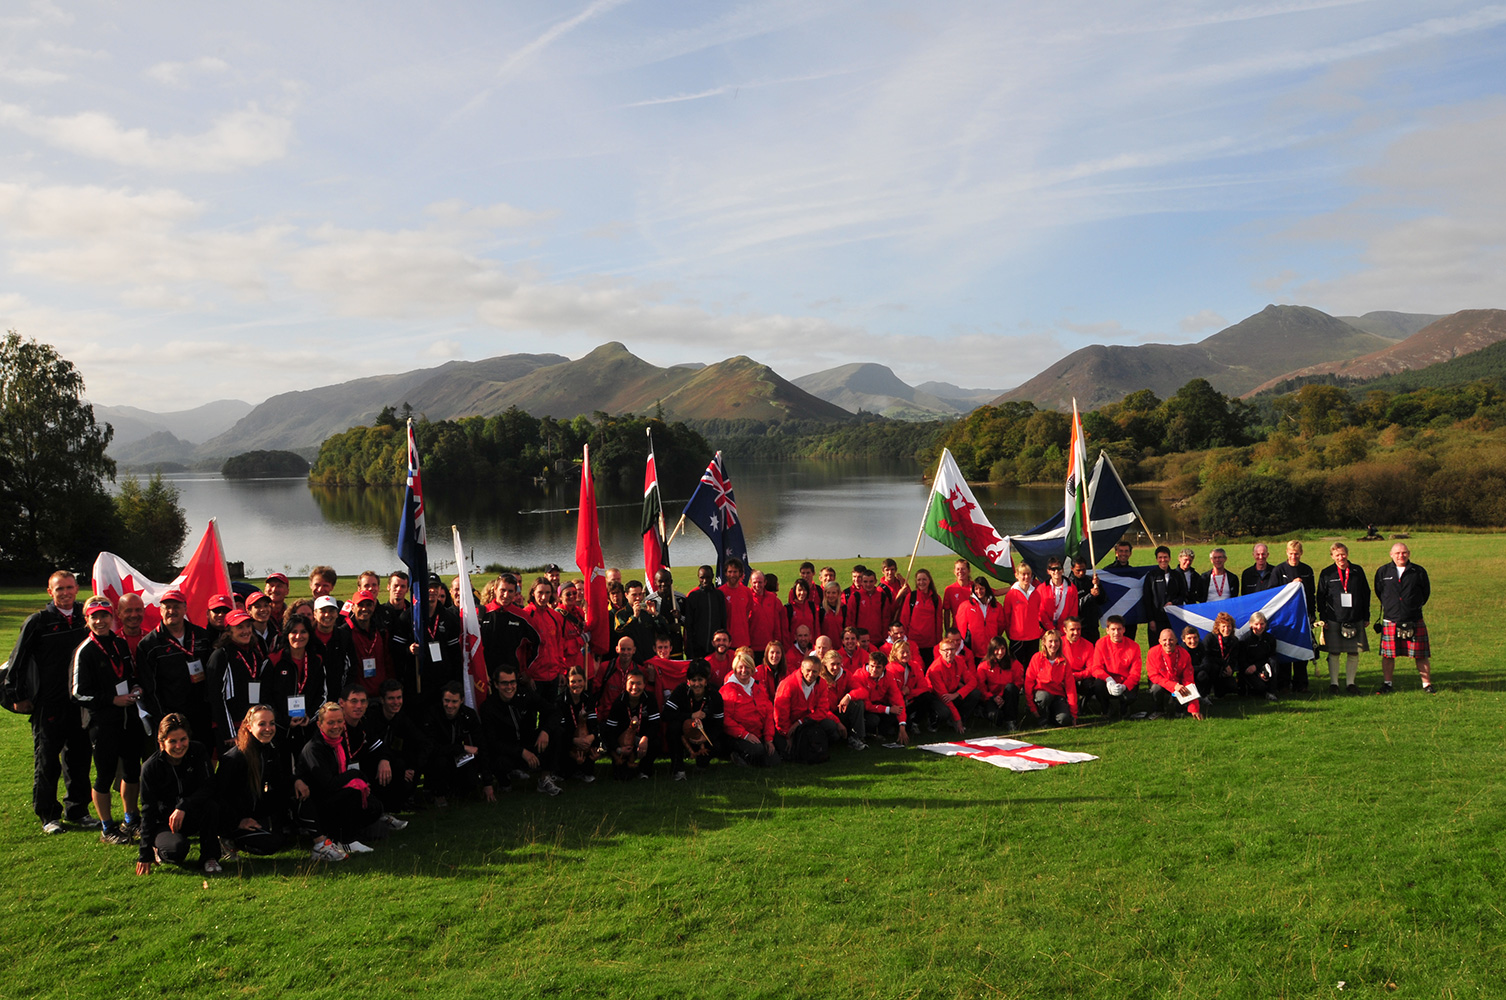 Keswick, Cumbria, September 2009Athletes assembled in Bitts Park with Derwentwater etc beyond, after the opening ceremony.